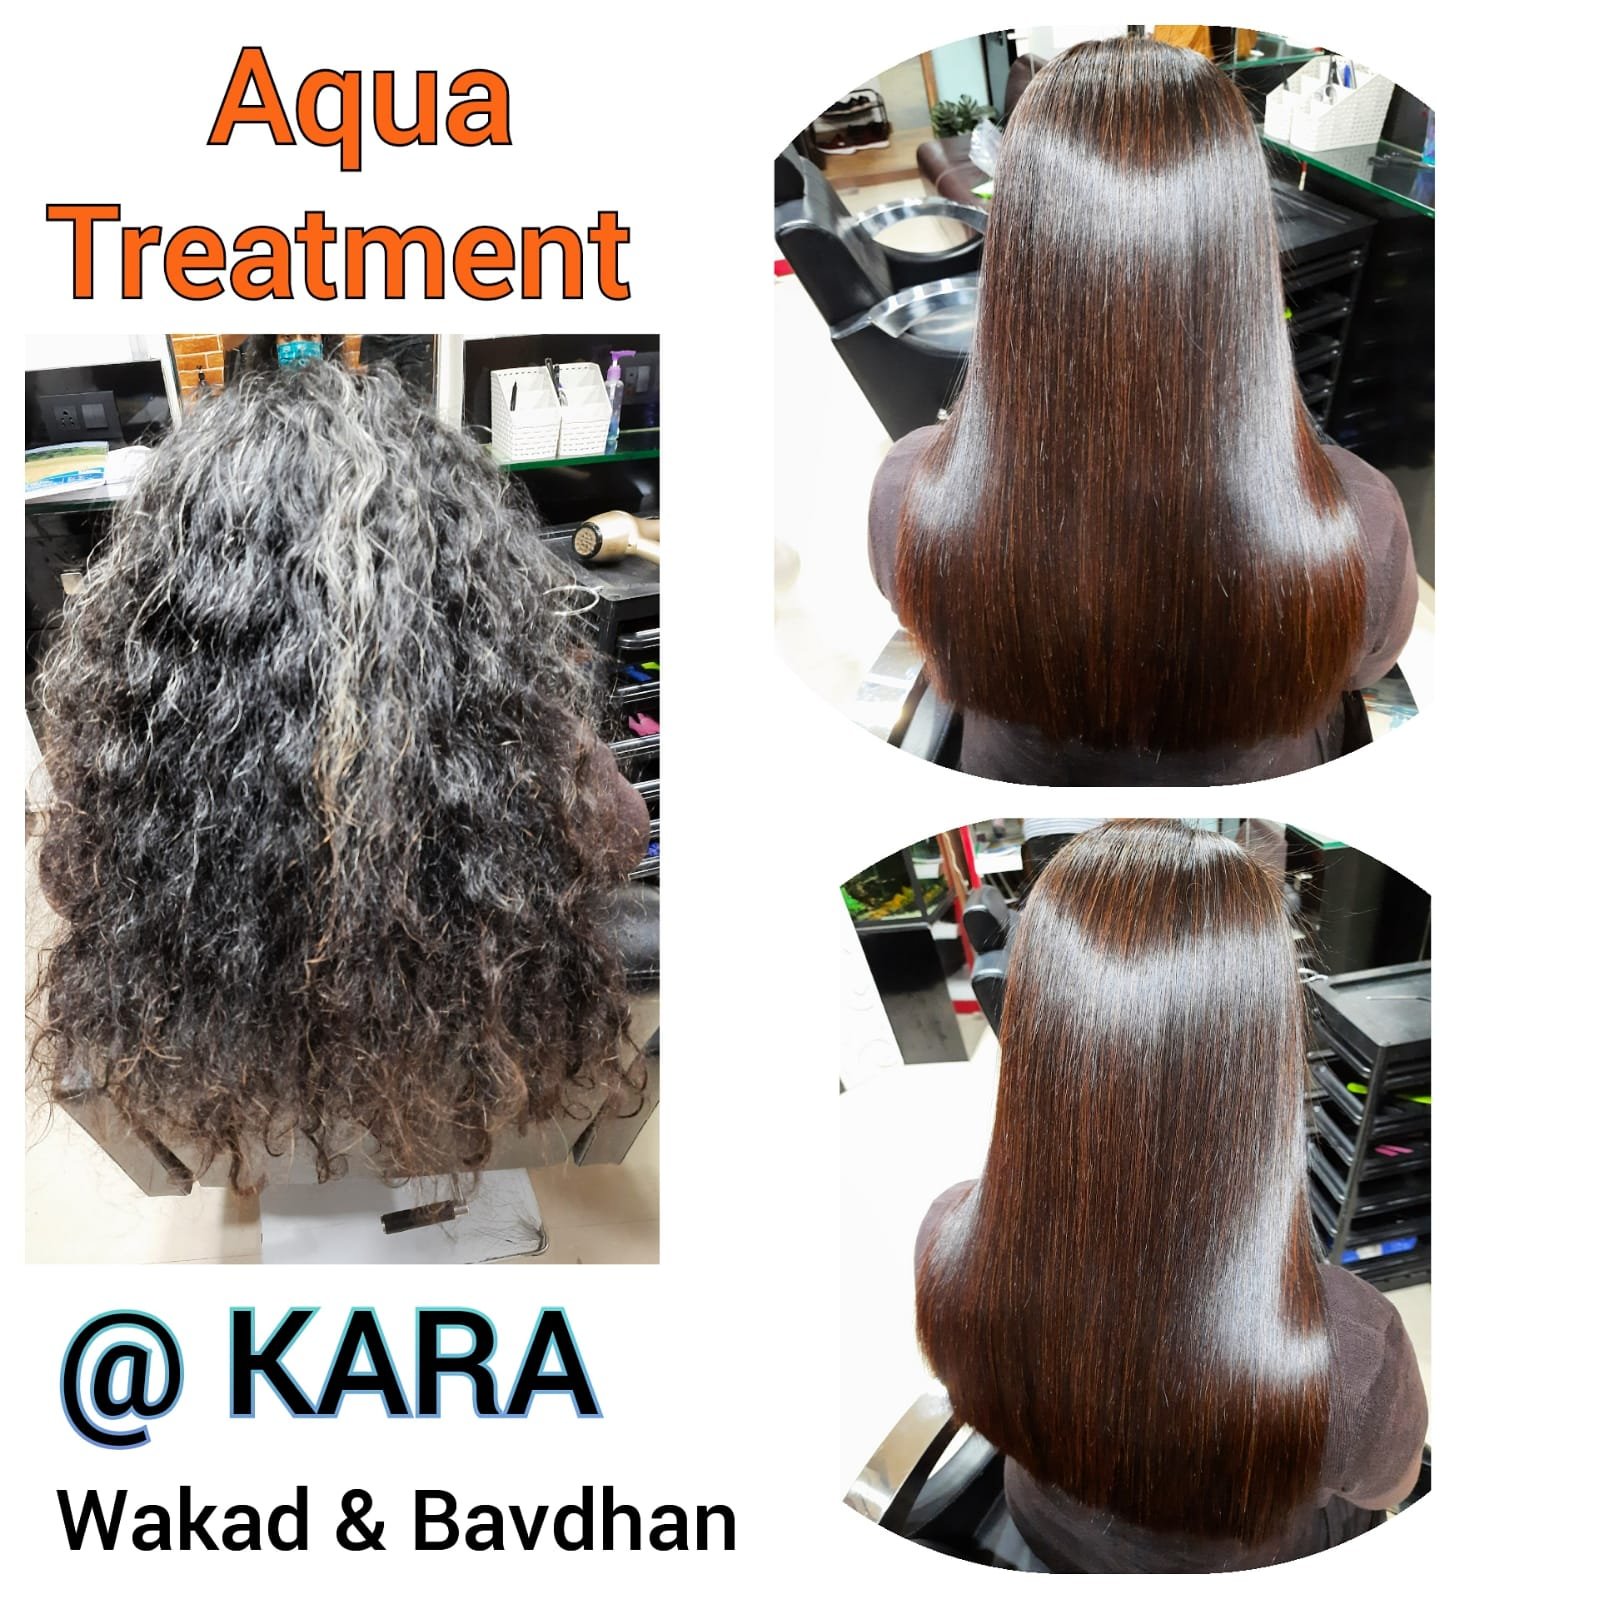 When should I wash my hair after a hair spa  Quora